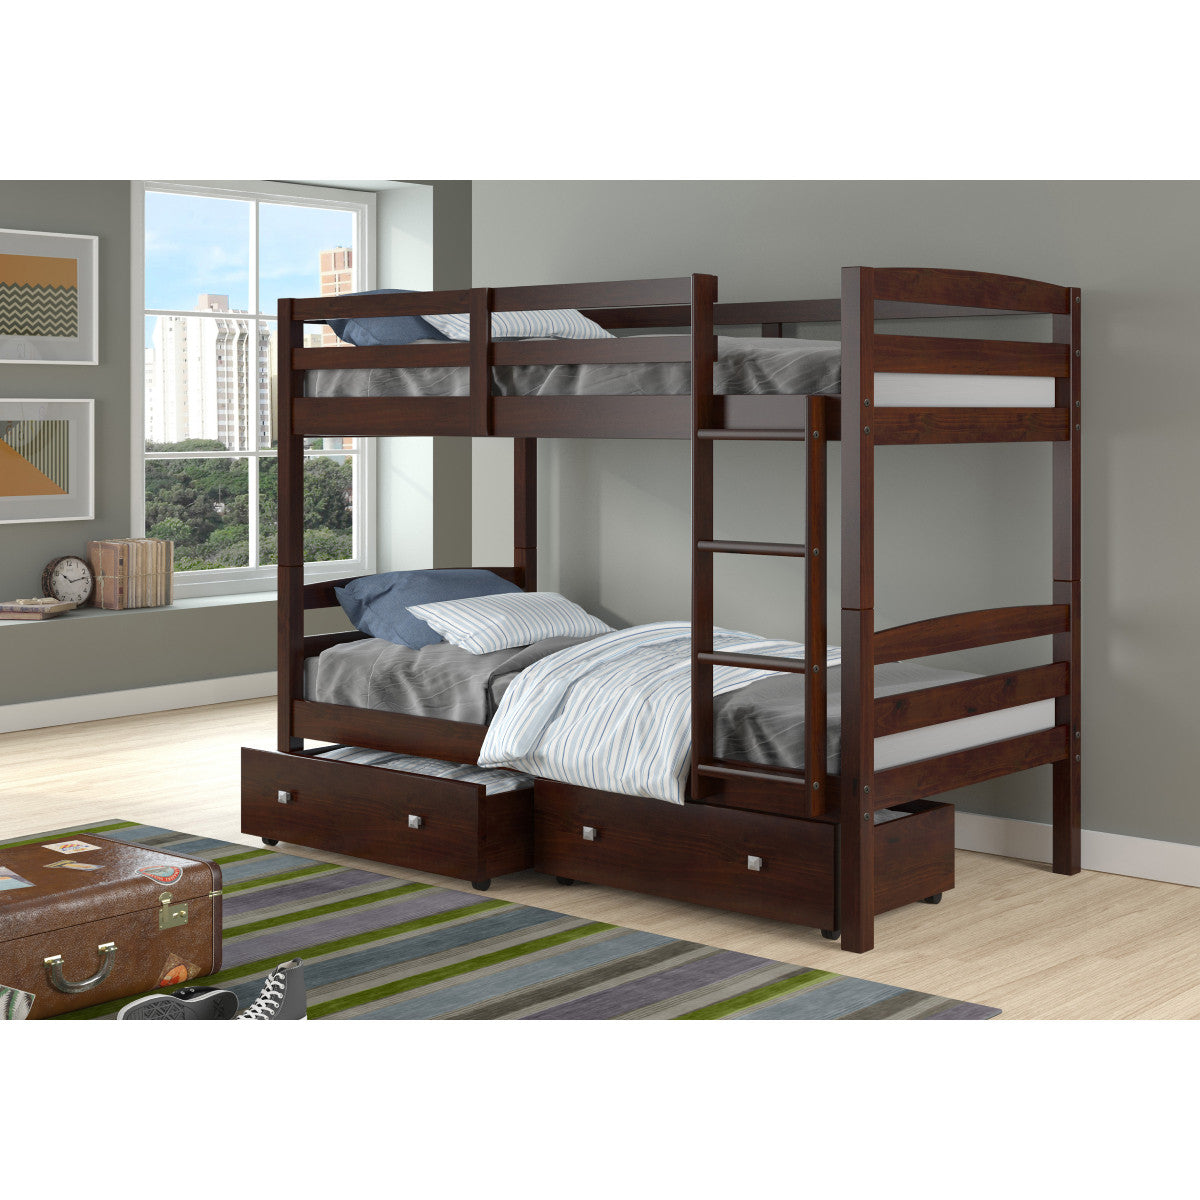 4100-CP 505 CAPPUCCINO TWIN/TWIN BUNK BED + UNDERBED DRAWERS